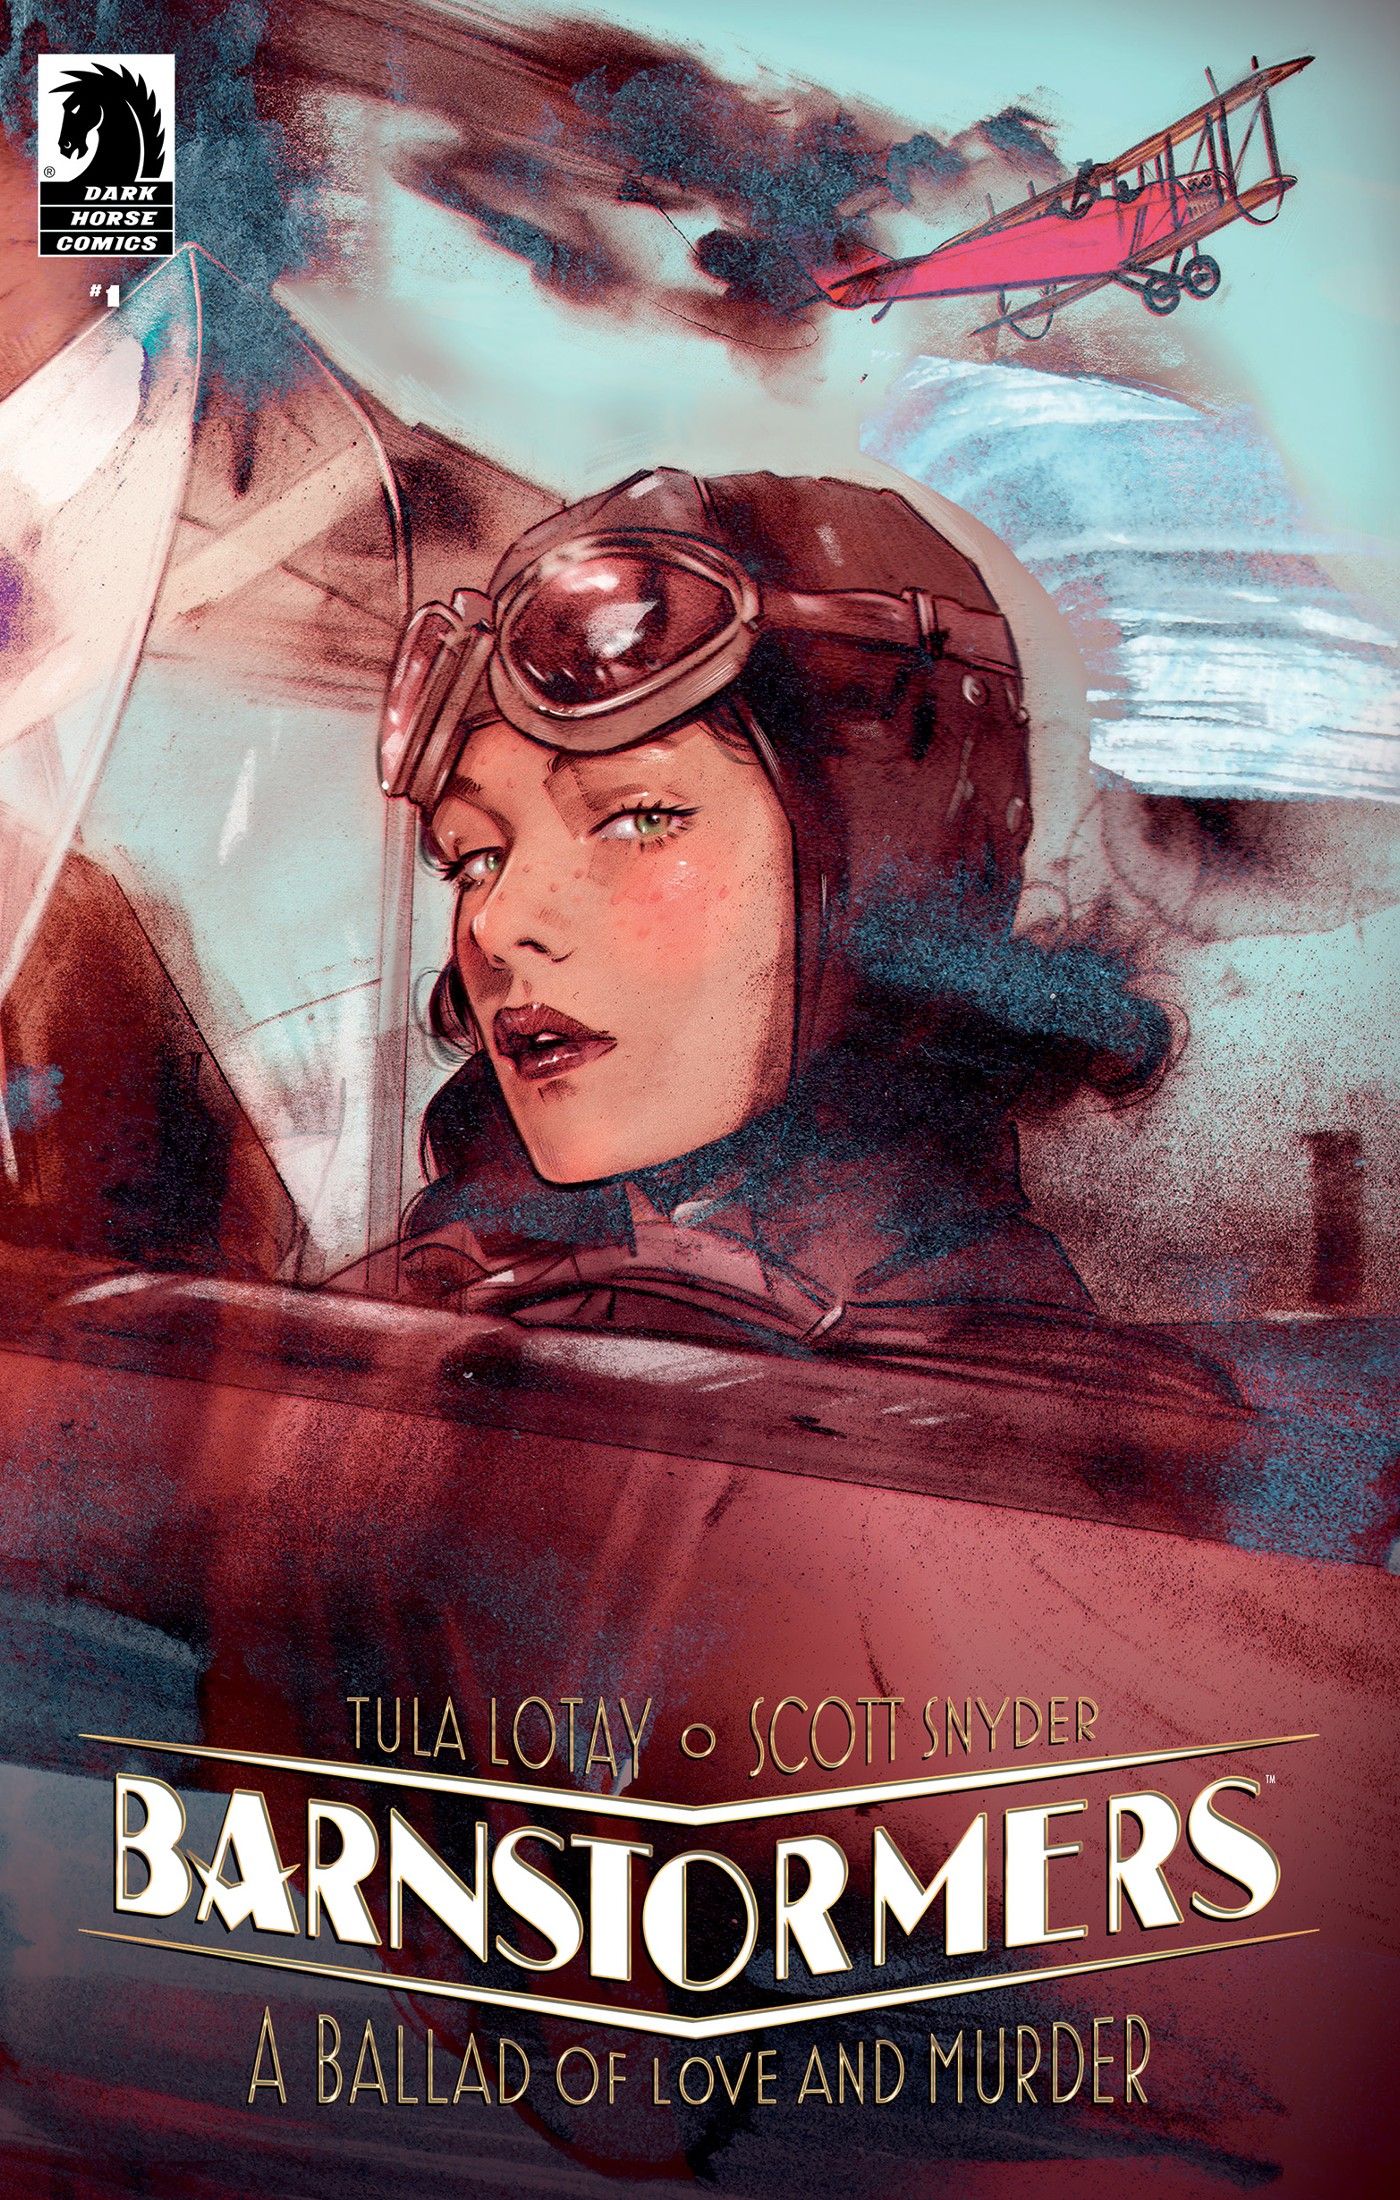 BARNSTORMERS From Scott Snyder & Tula Lotay Gets New Print Release